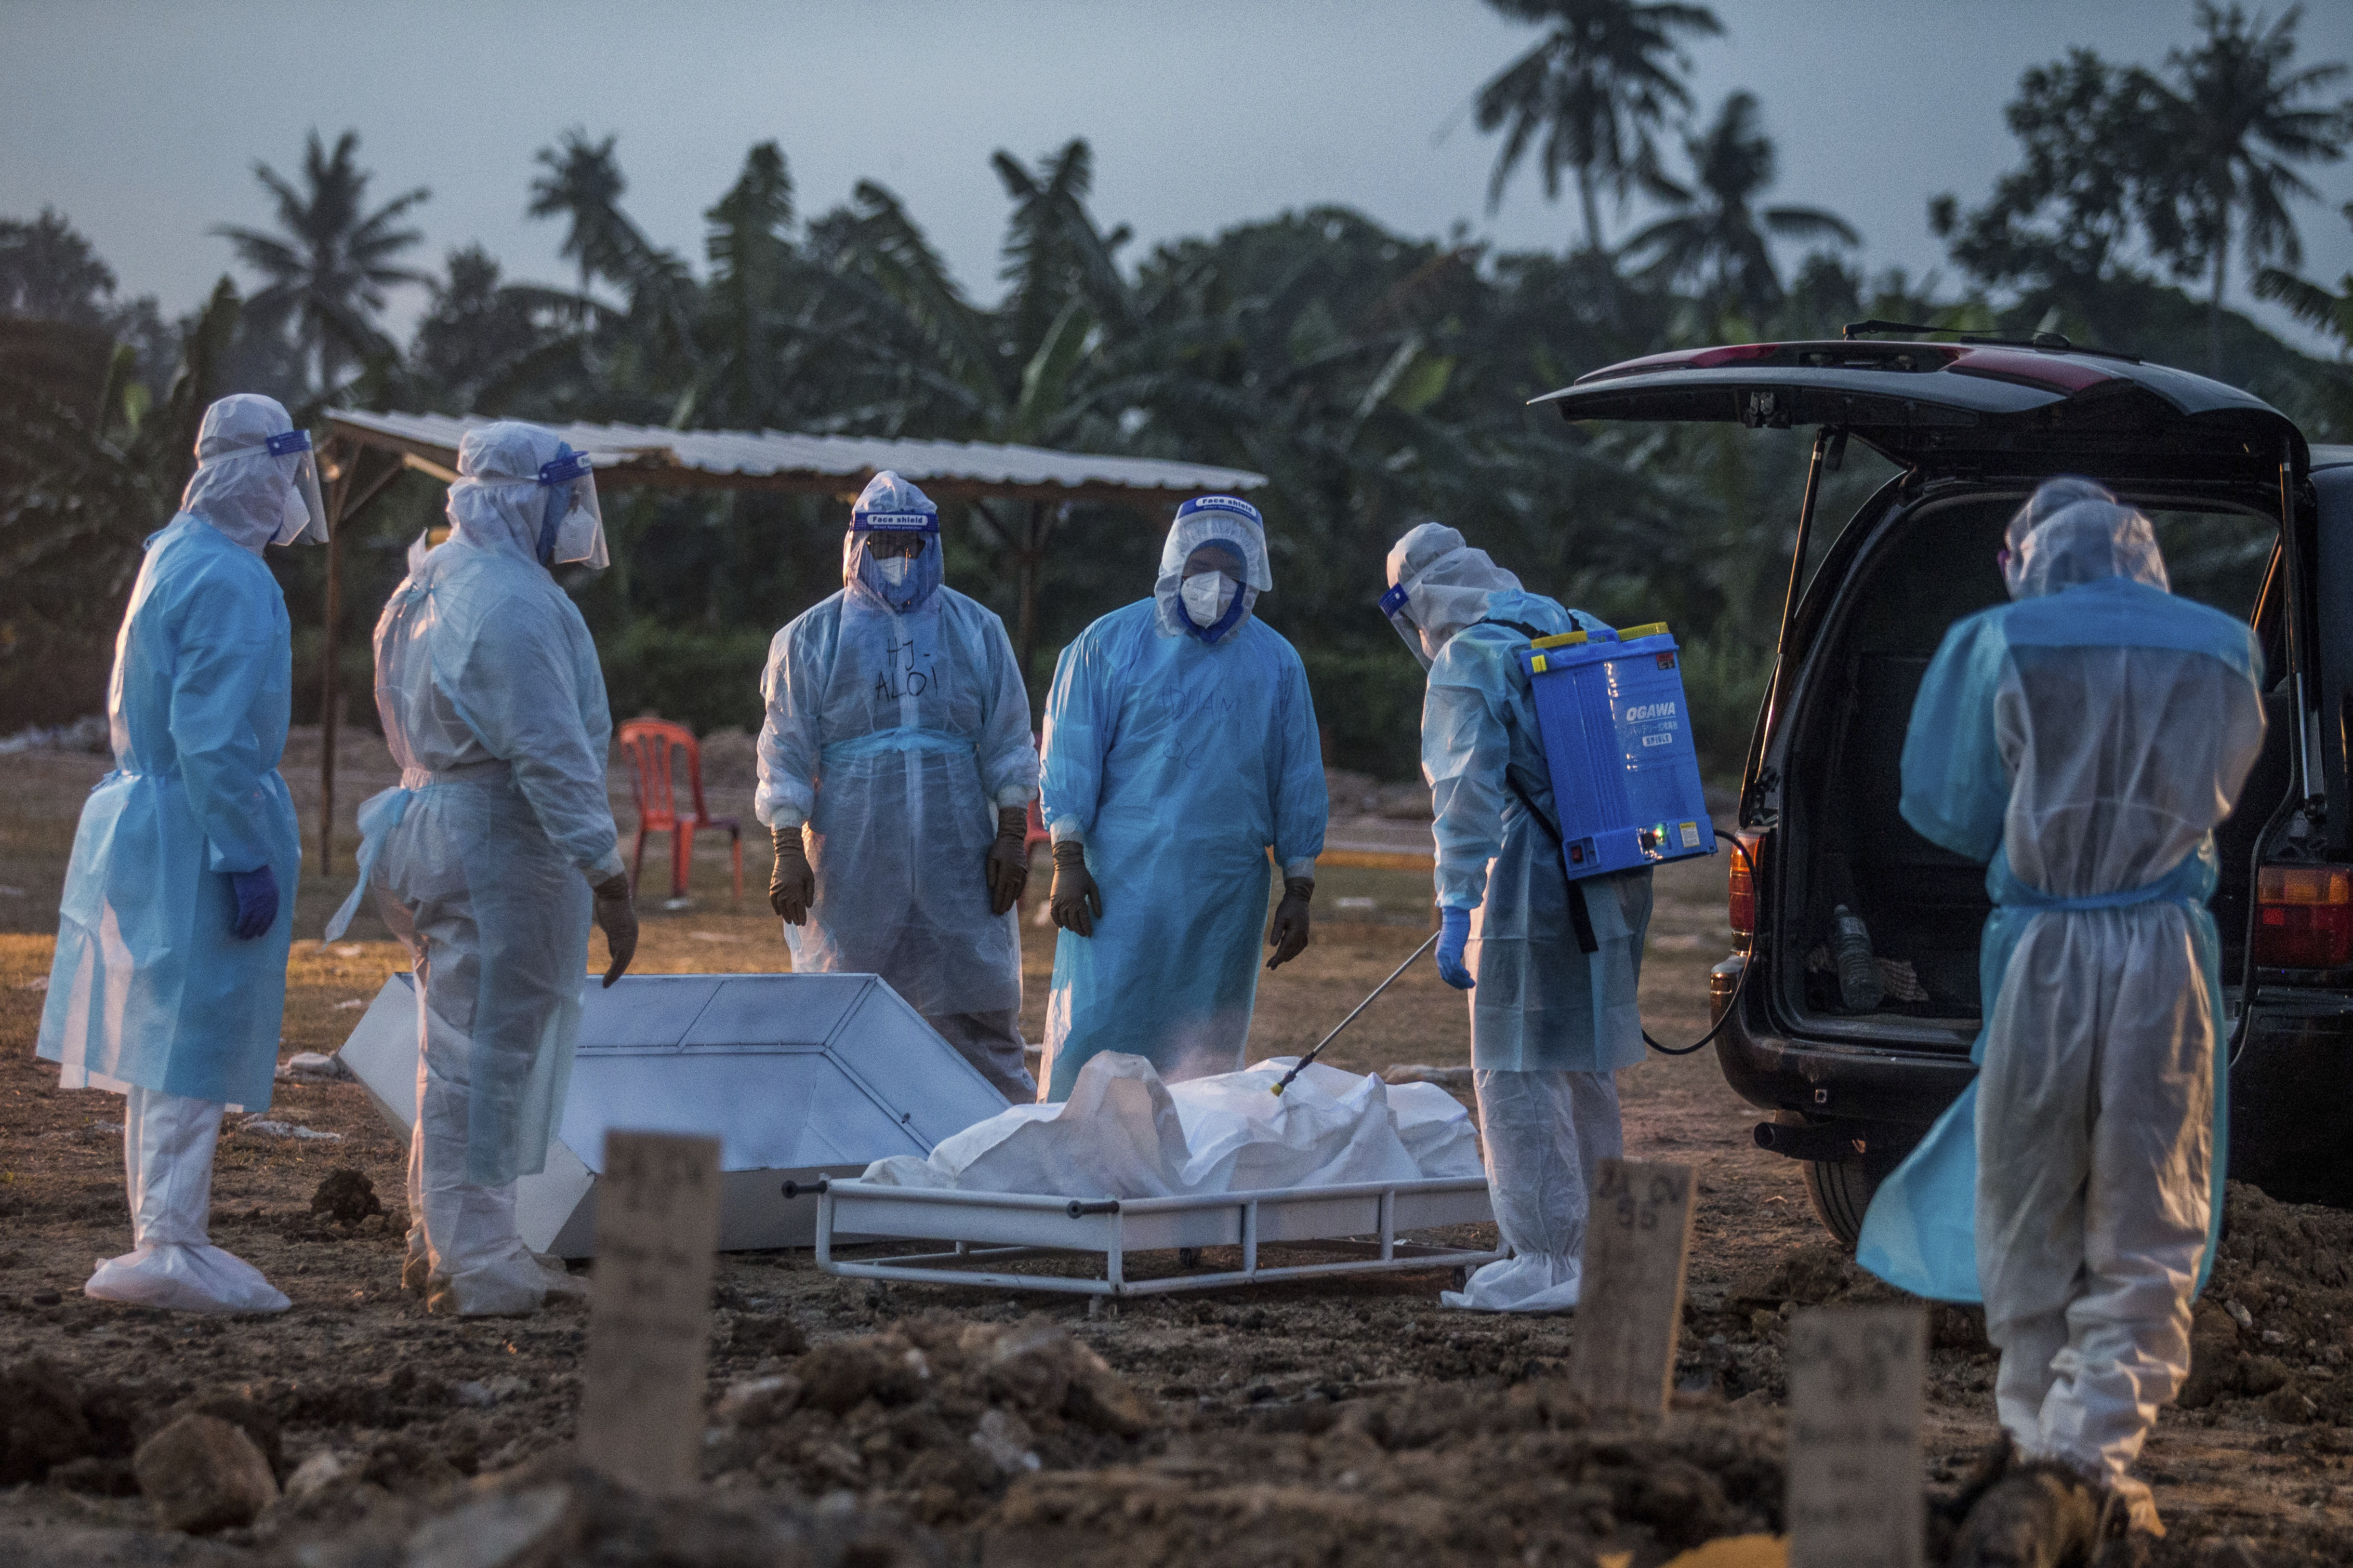 Health workers during a burial of COVID-19 victims in Klang, Malaysia. Photo by Zahim Mohd / AP